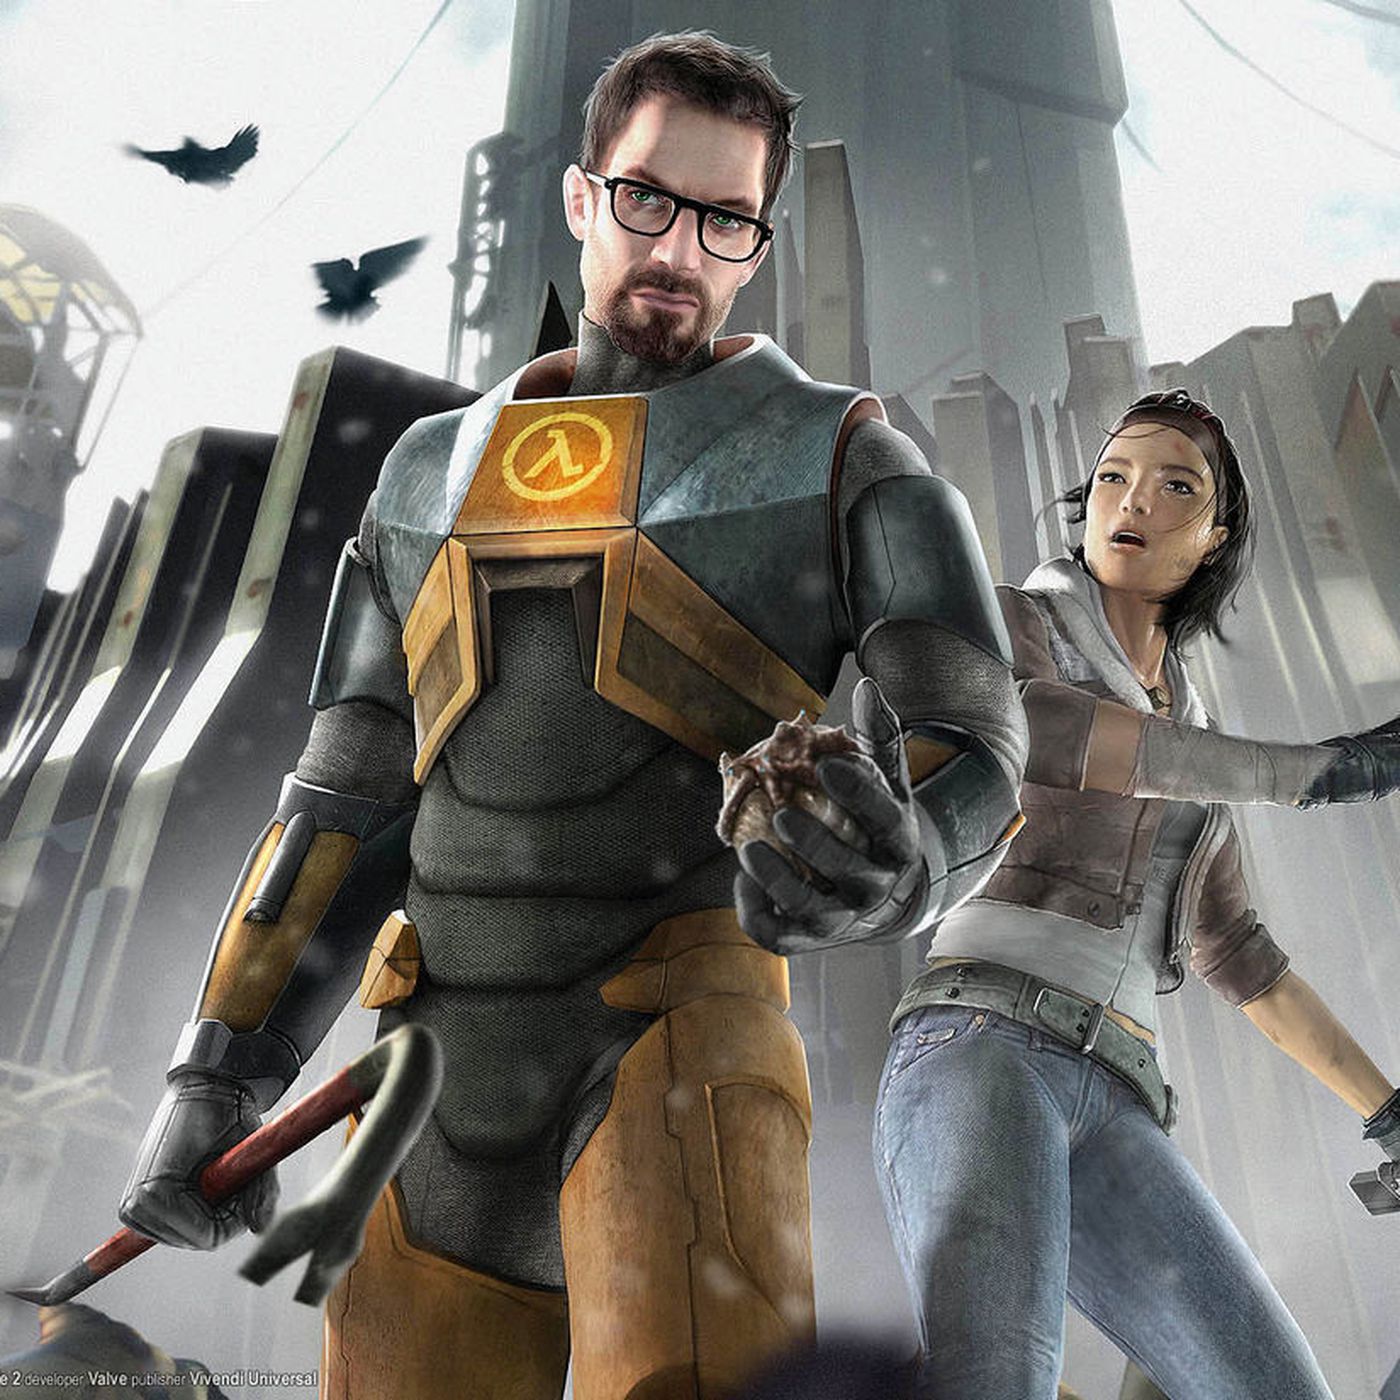 HalfLife 3 What Does It Have For Us? Is It Going To Be The end